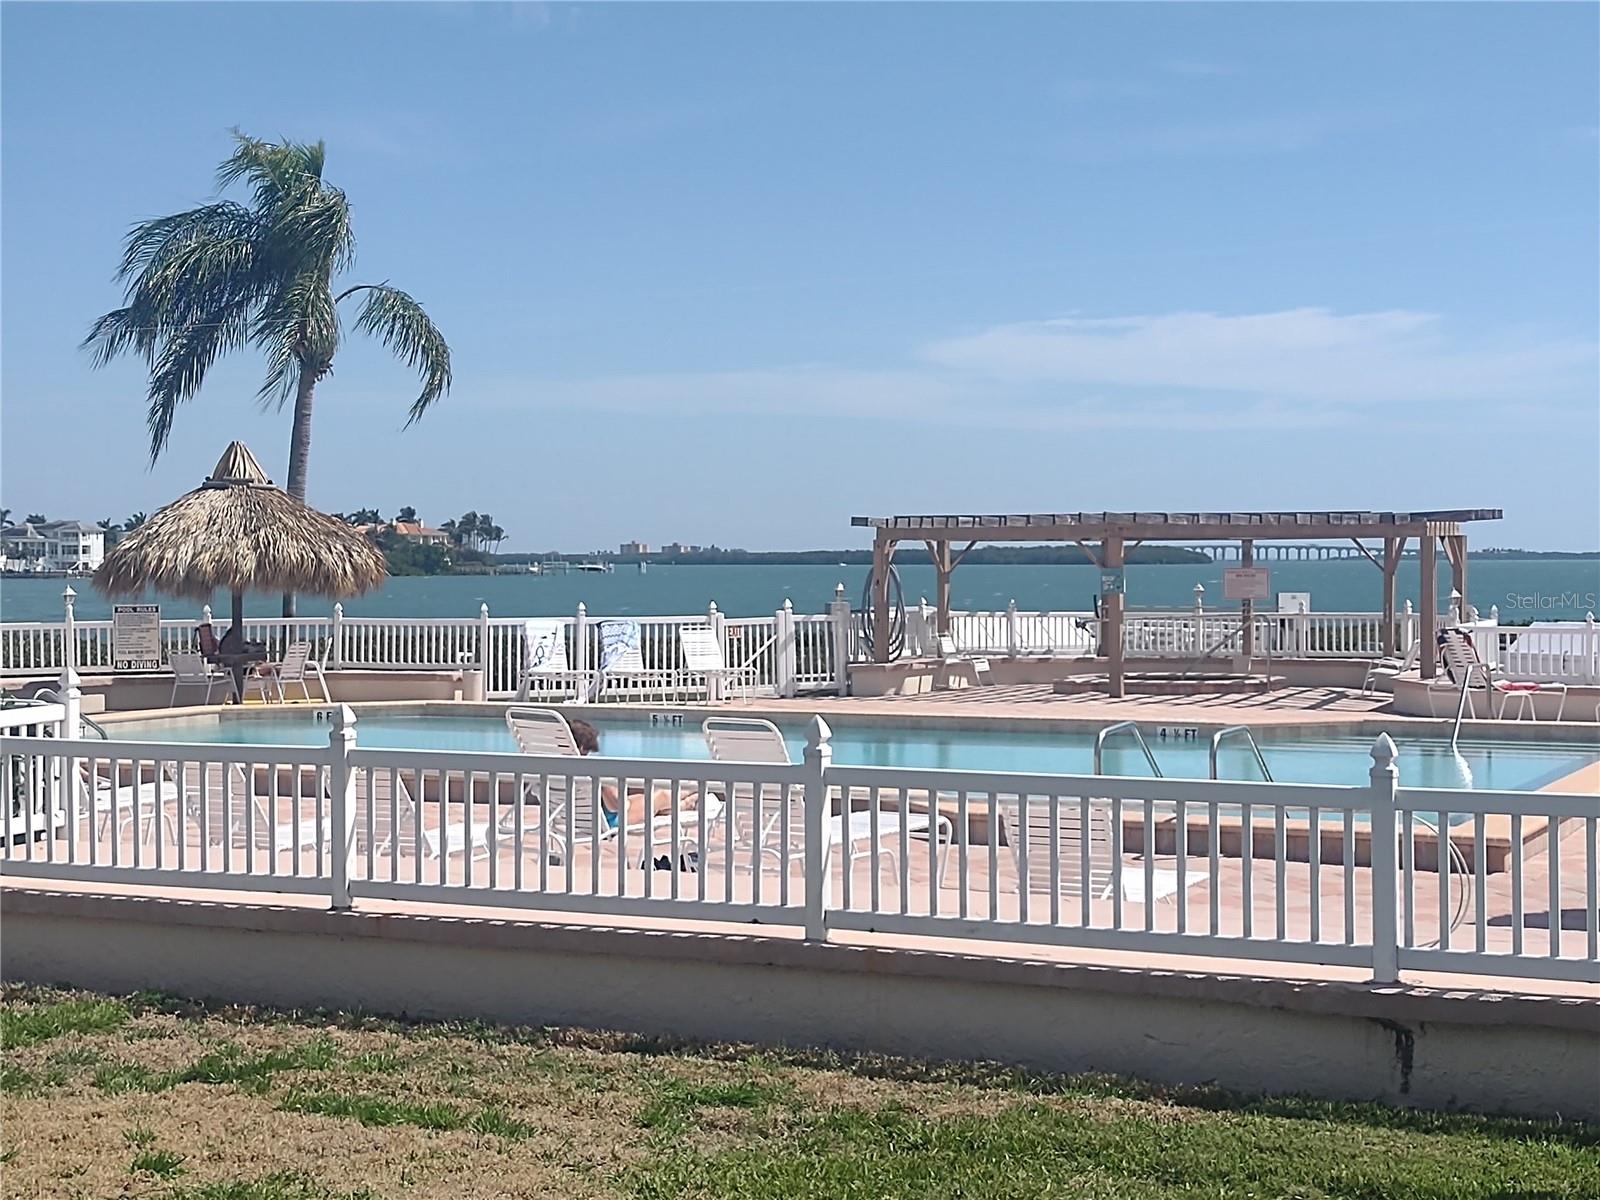 Large heated pool with spacious deck area. Pergola covered area is the spa. The bridge at the north end of the Skyway Bridge is in the background.